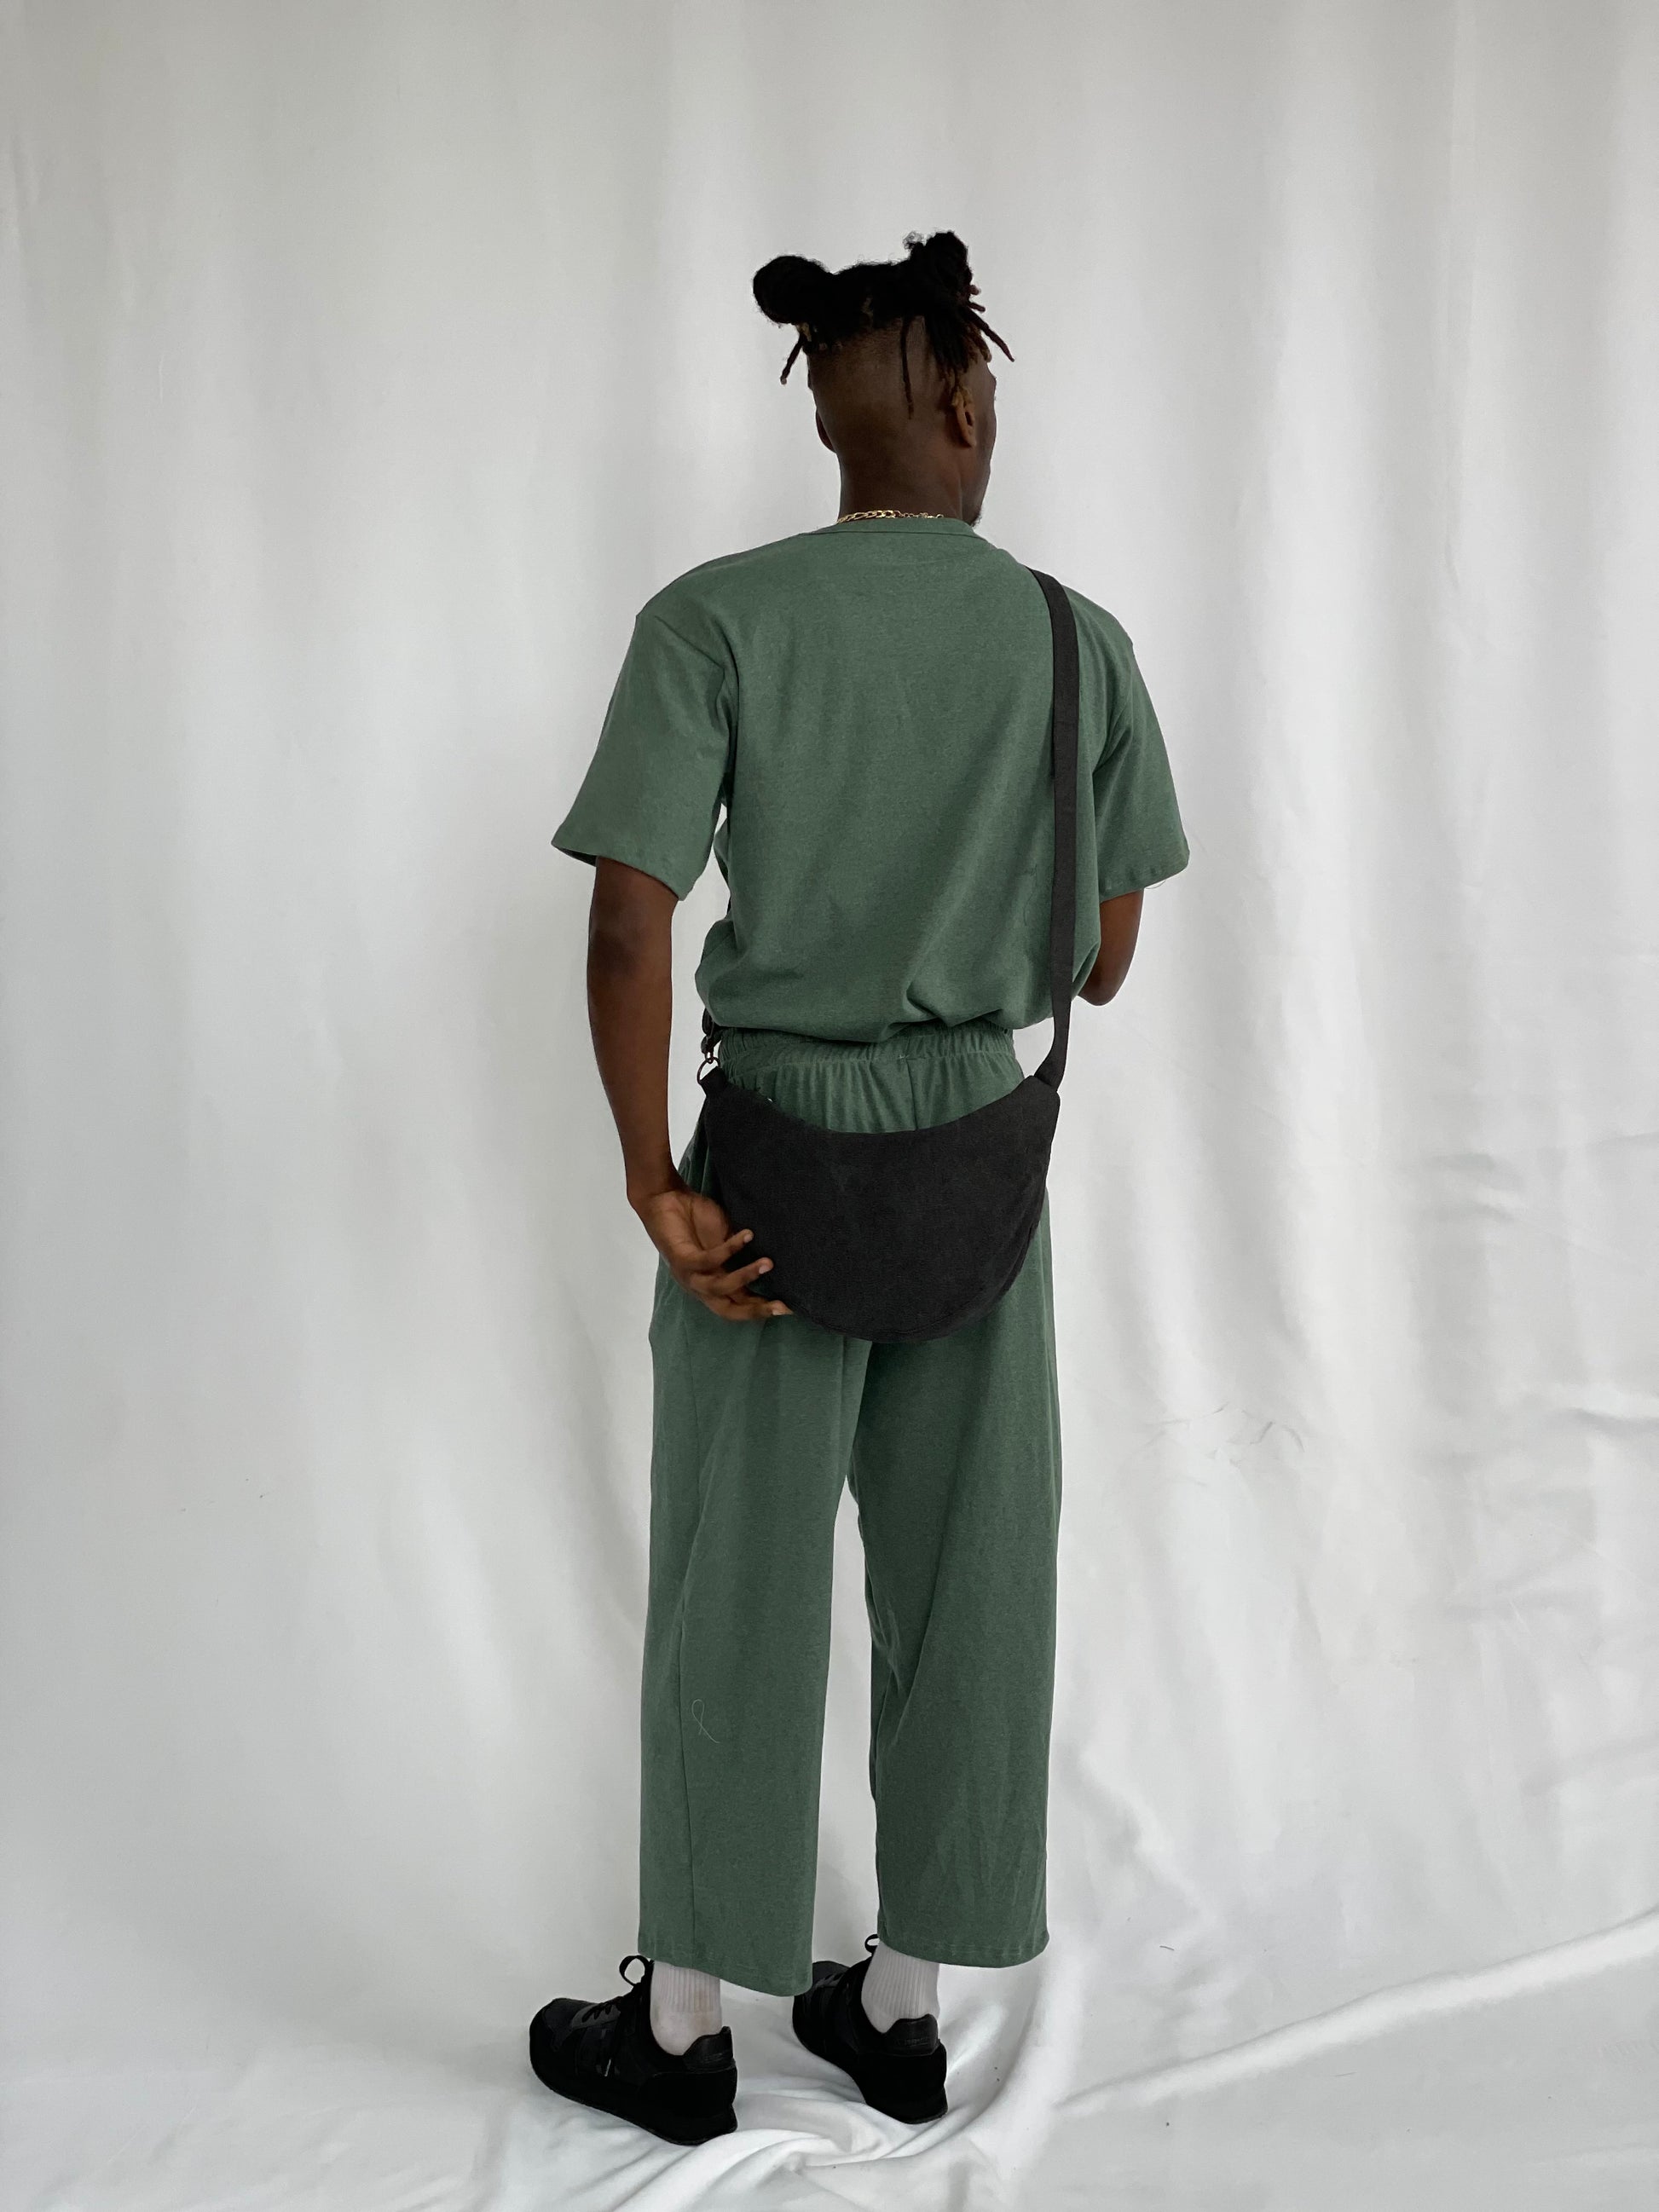 Model wears black sling bag with green t-shirt and pants against a white backdrop.